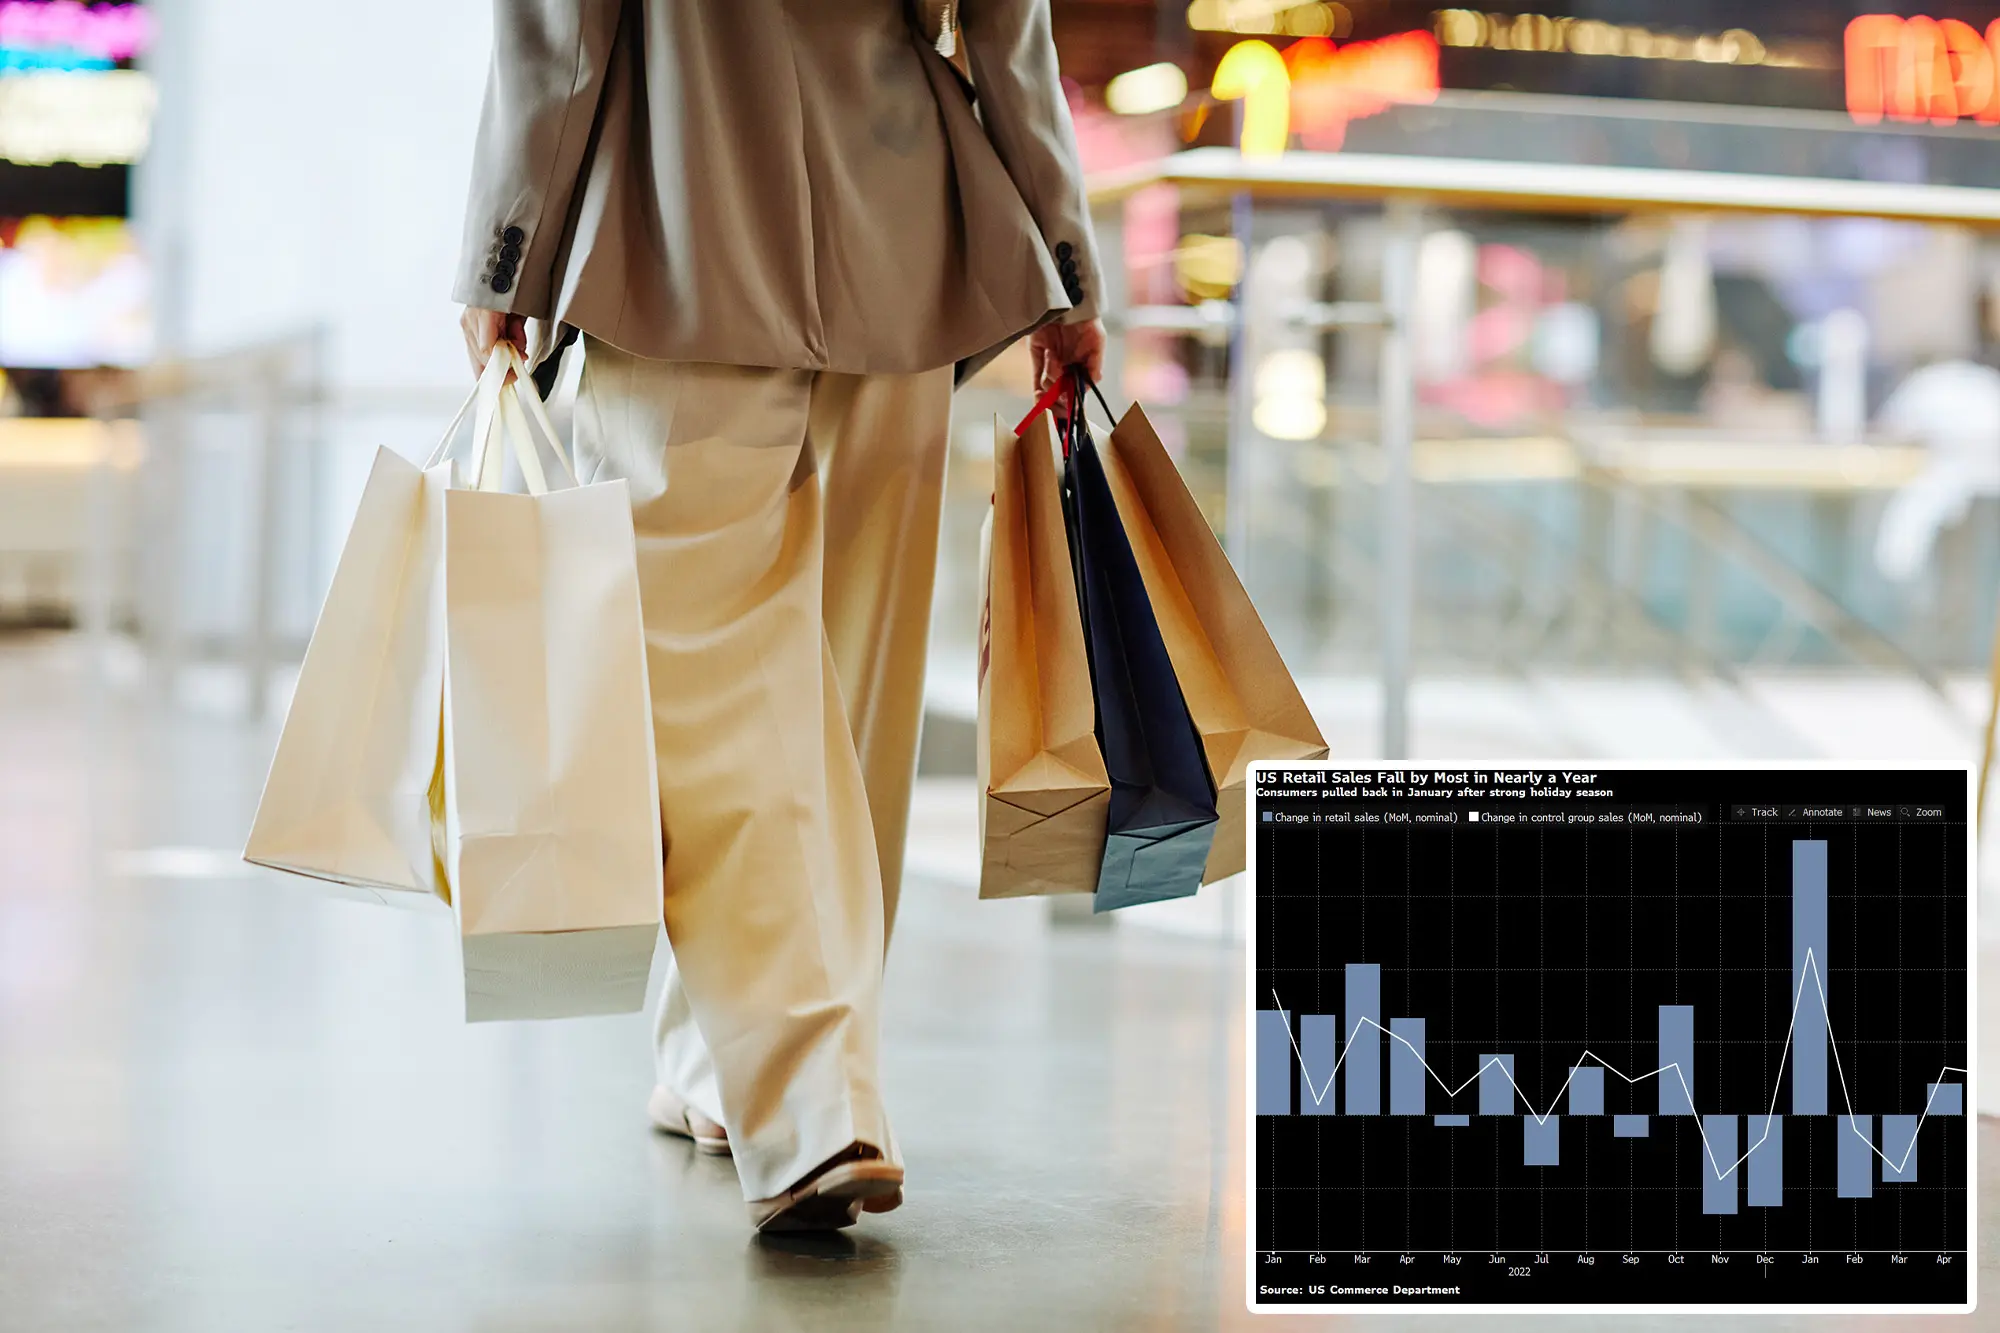 Retail Sales Took A Dip in January